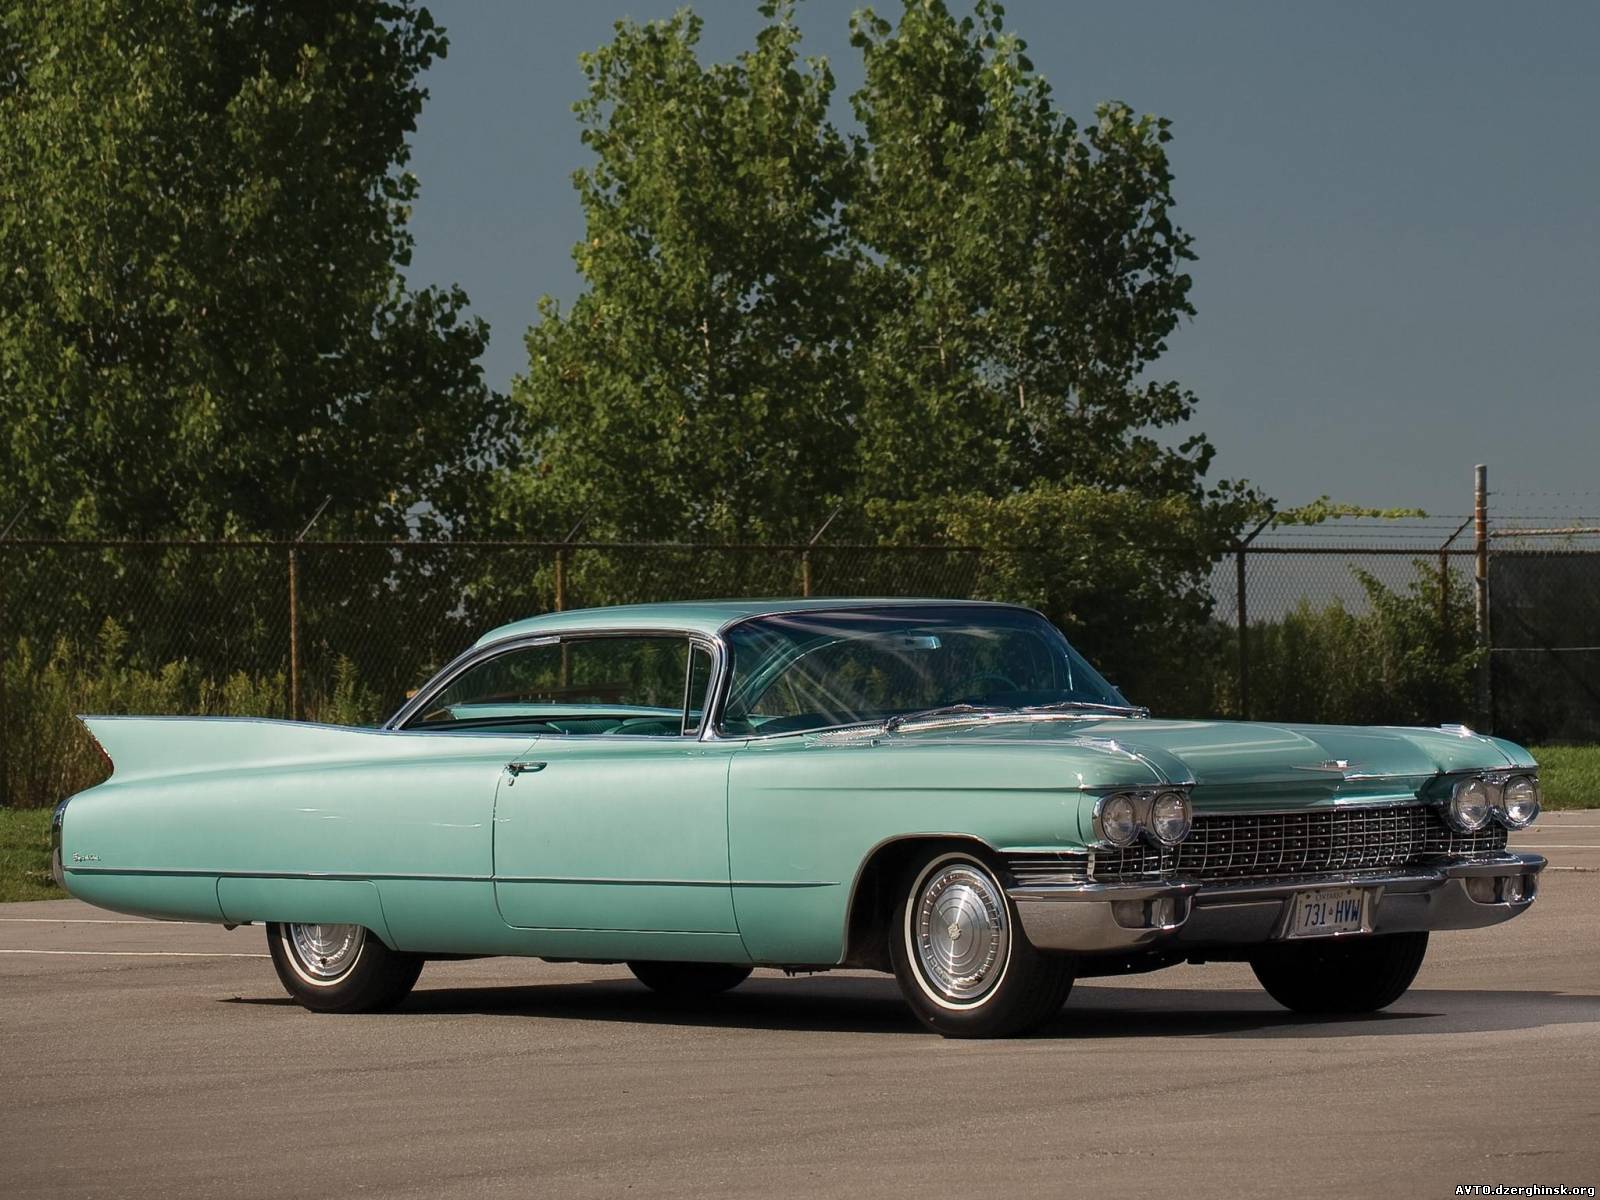 076. Cadillac Sixty-Two Coupe DeVille 1960